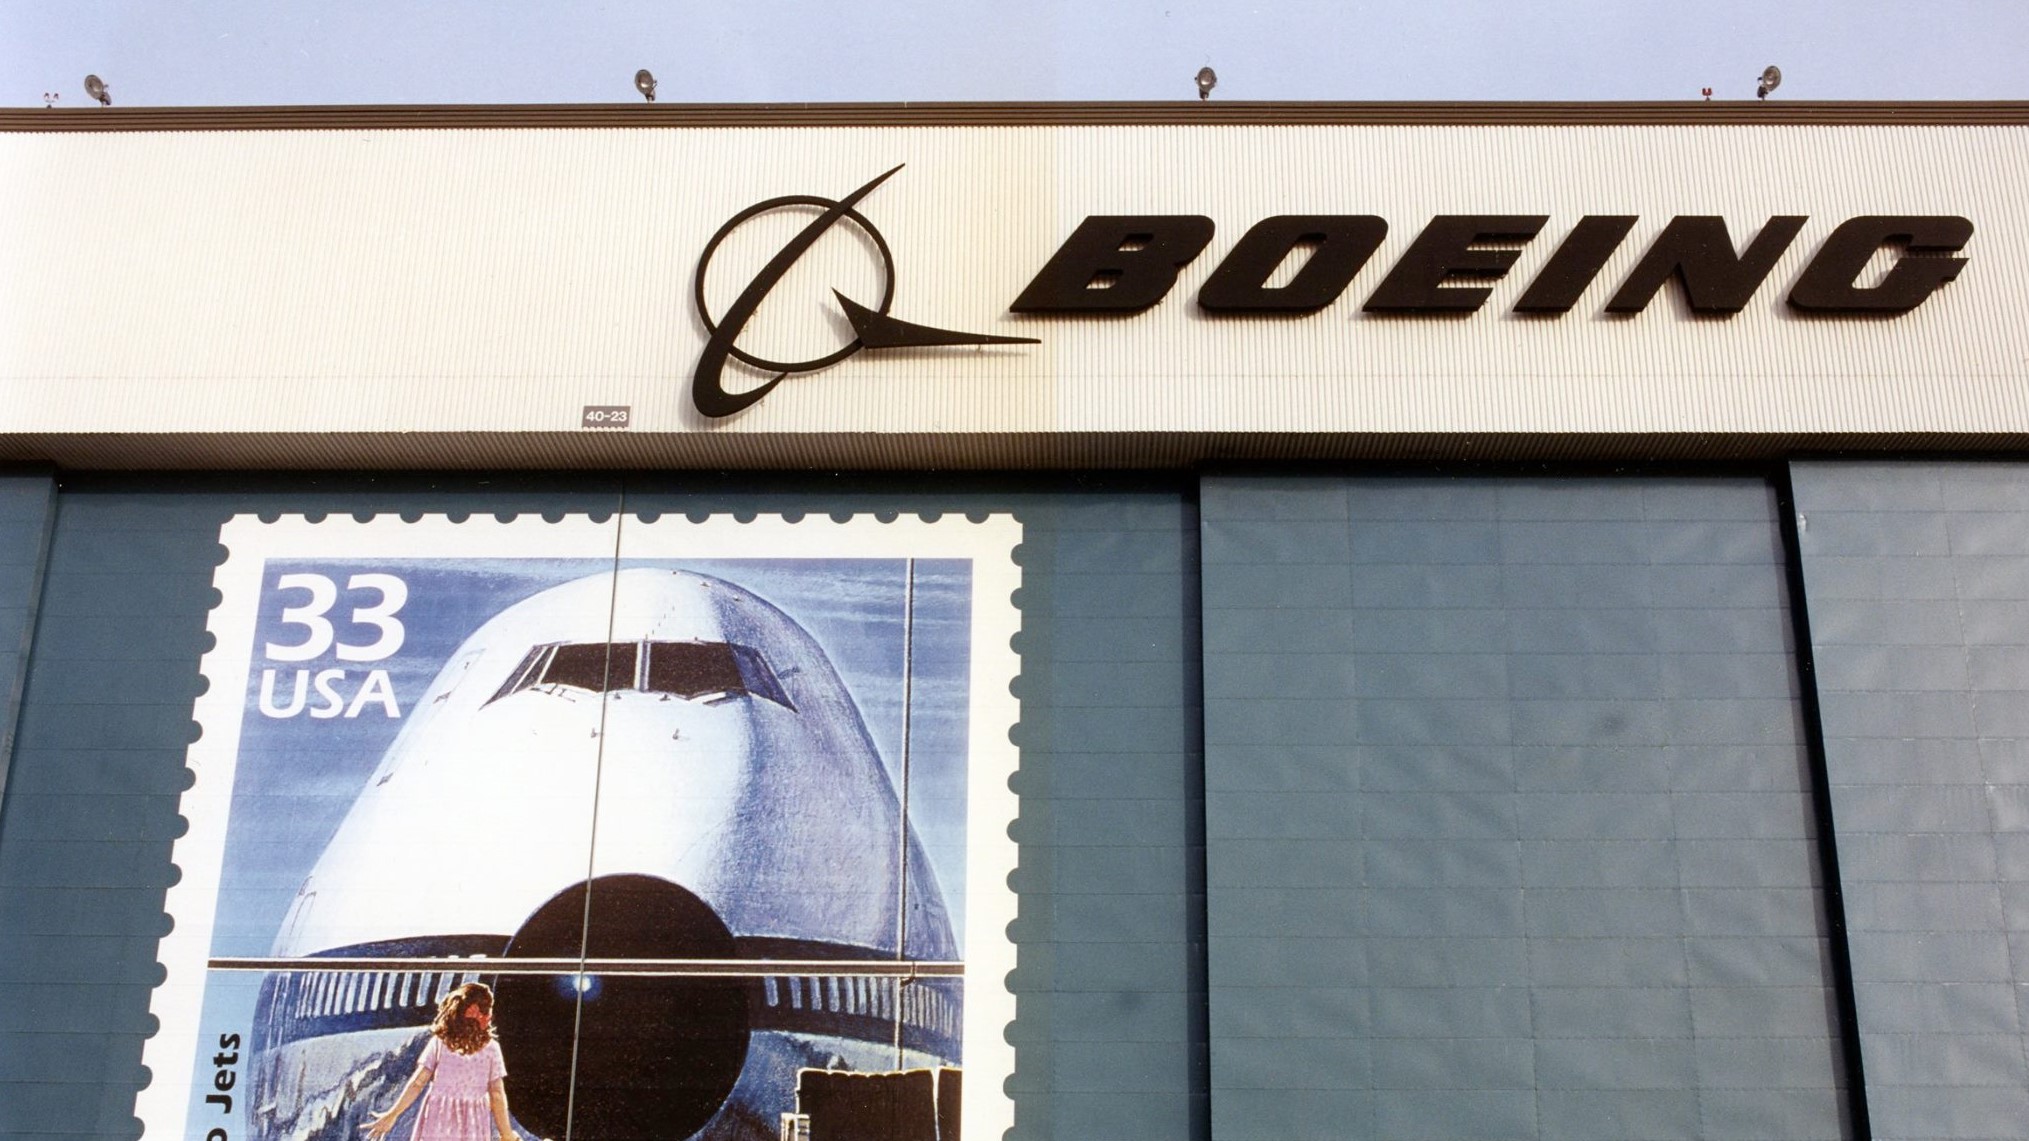 Boeing broke 2021 deal that shielded it from charges over 737 crashes, says DoJ